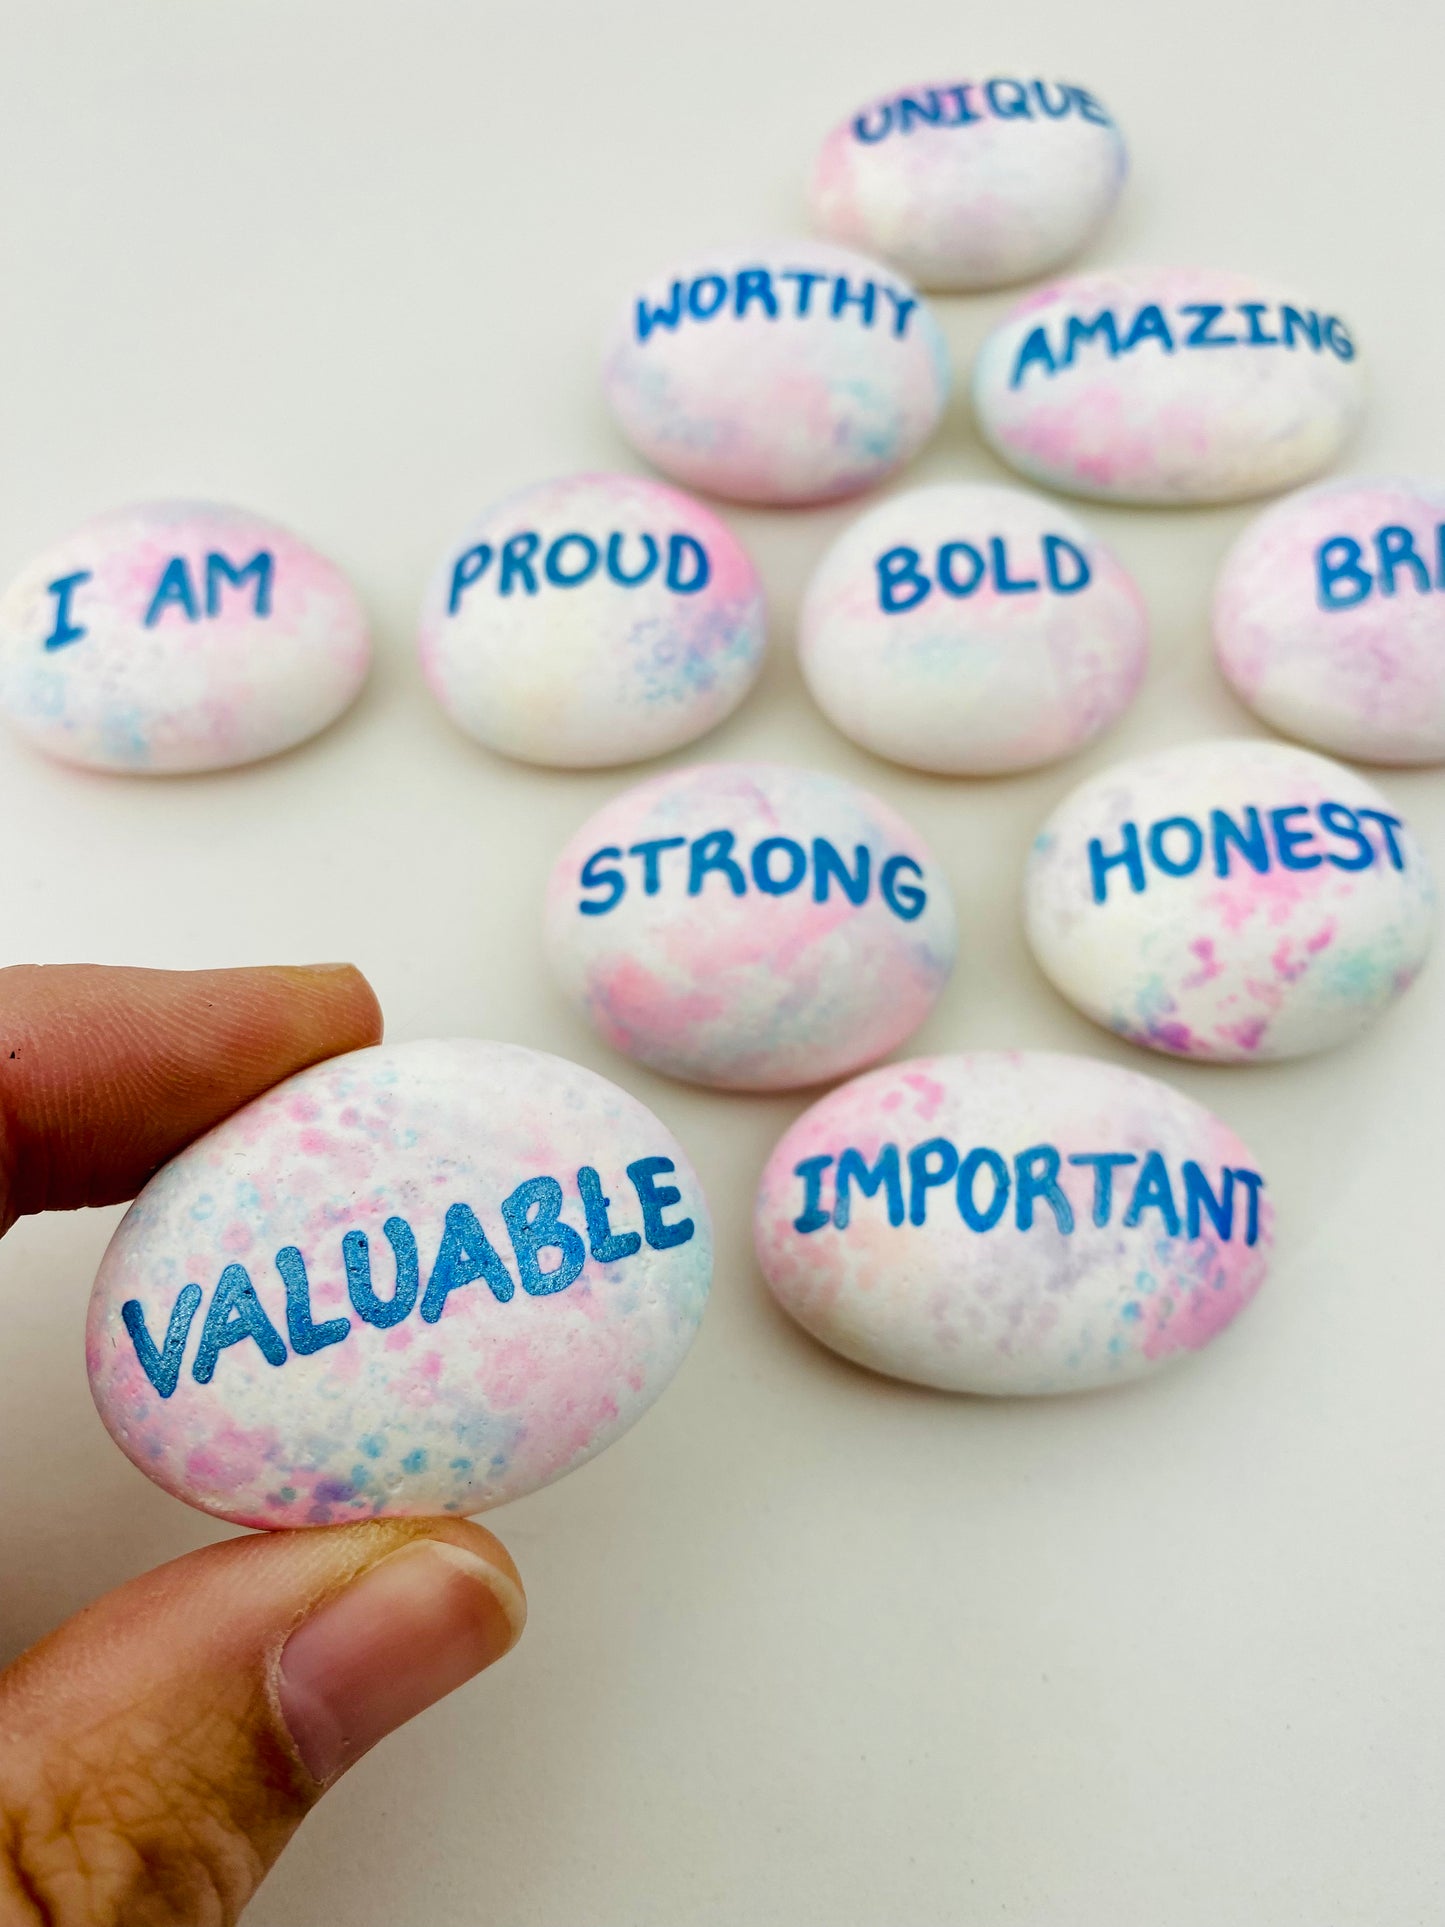 Hand painted affirmation pebbles, one being held closer to the camera with the word Valuable